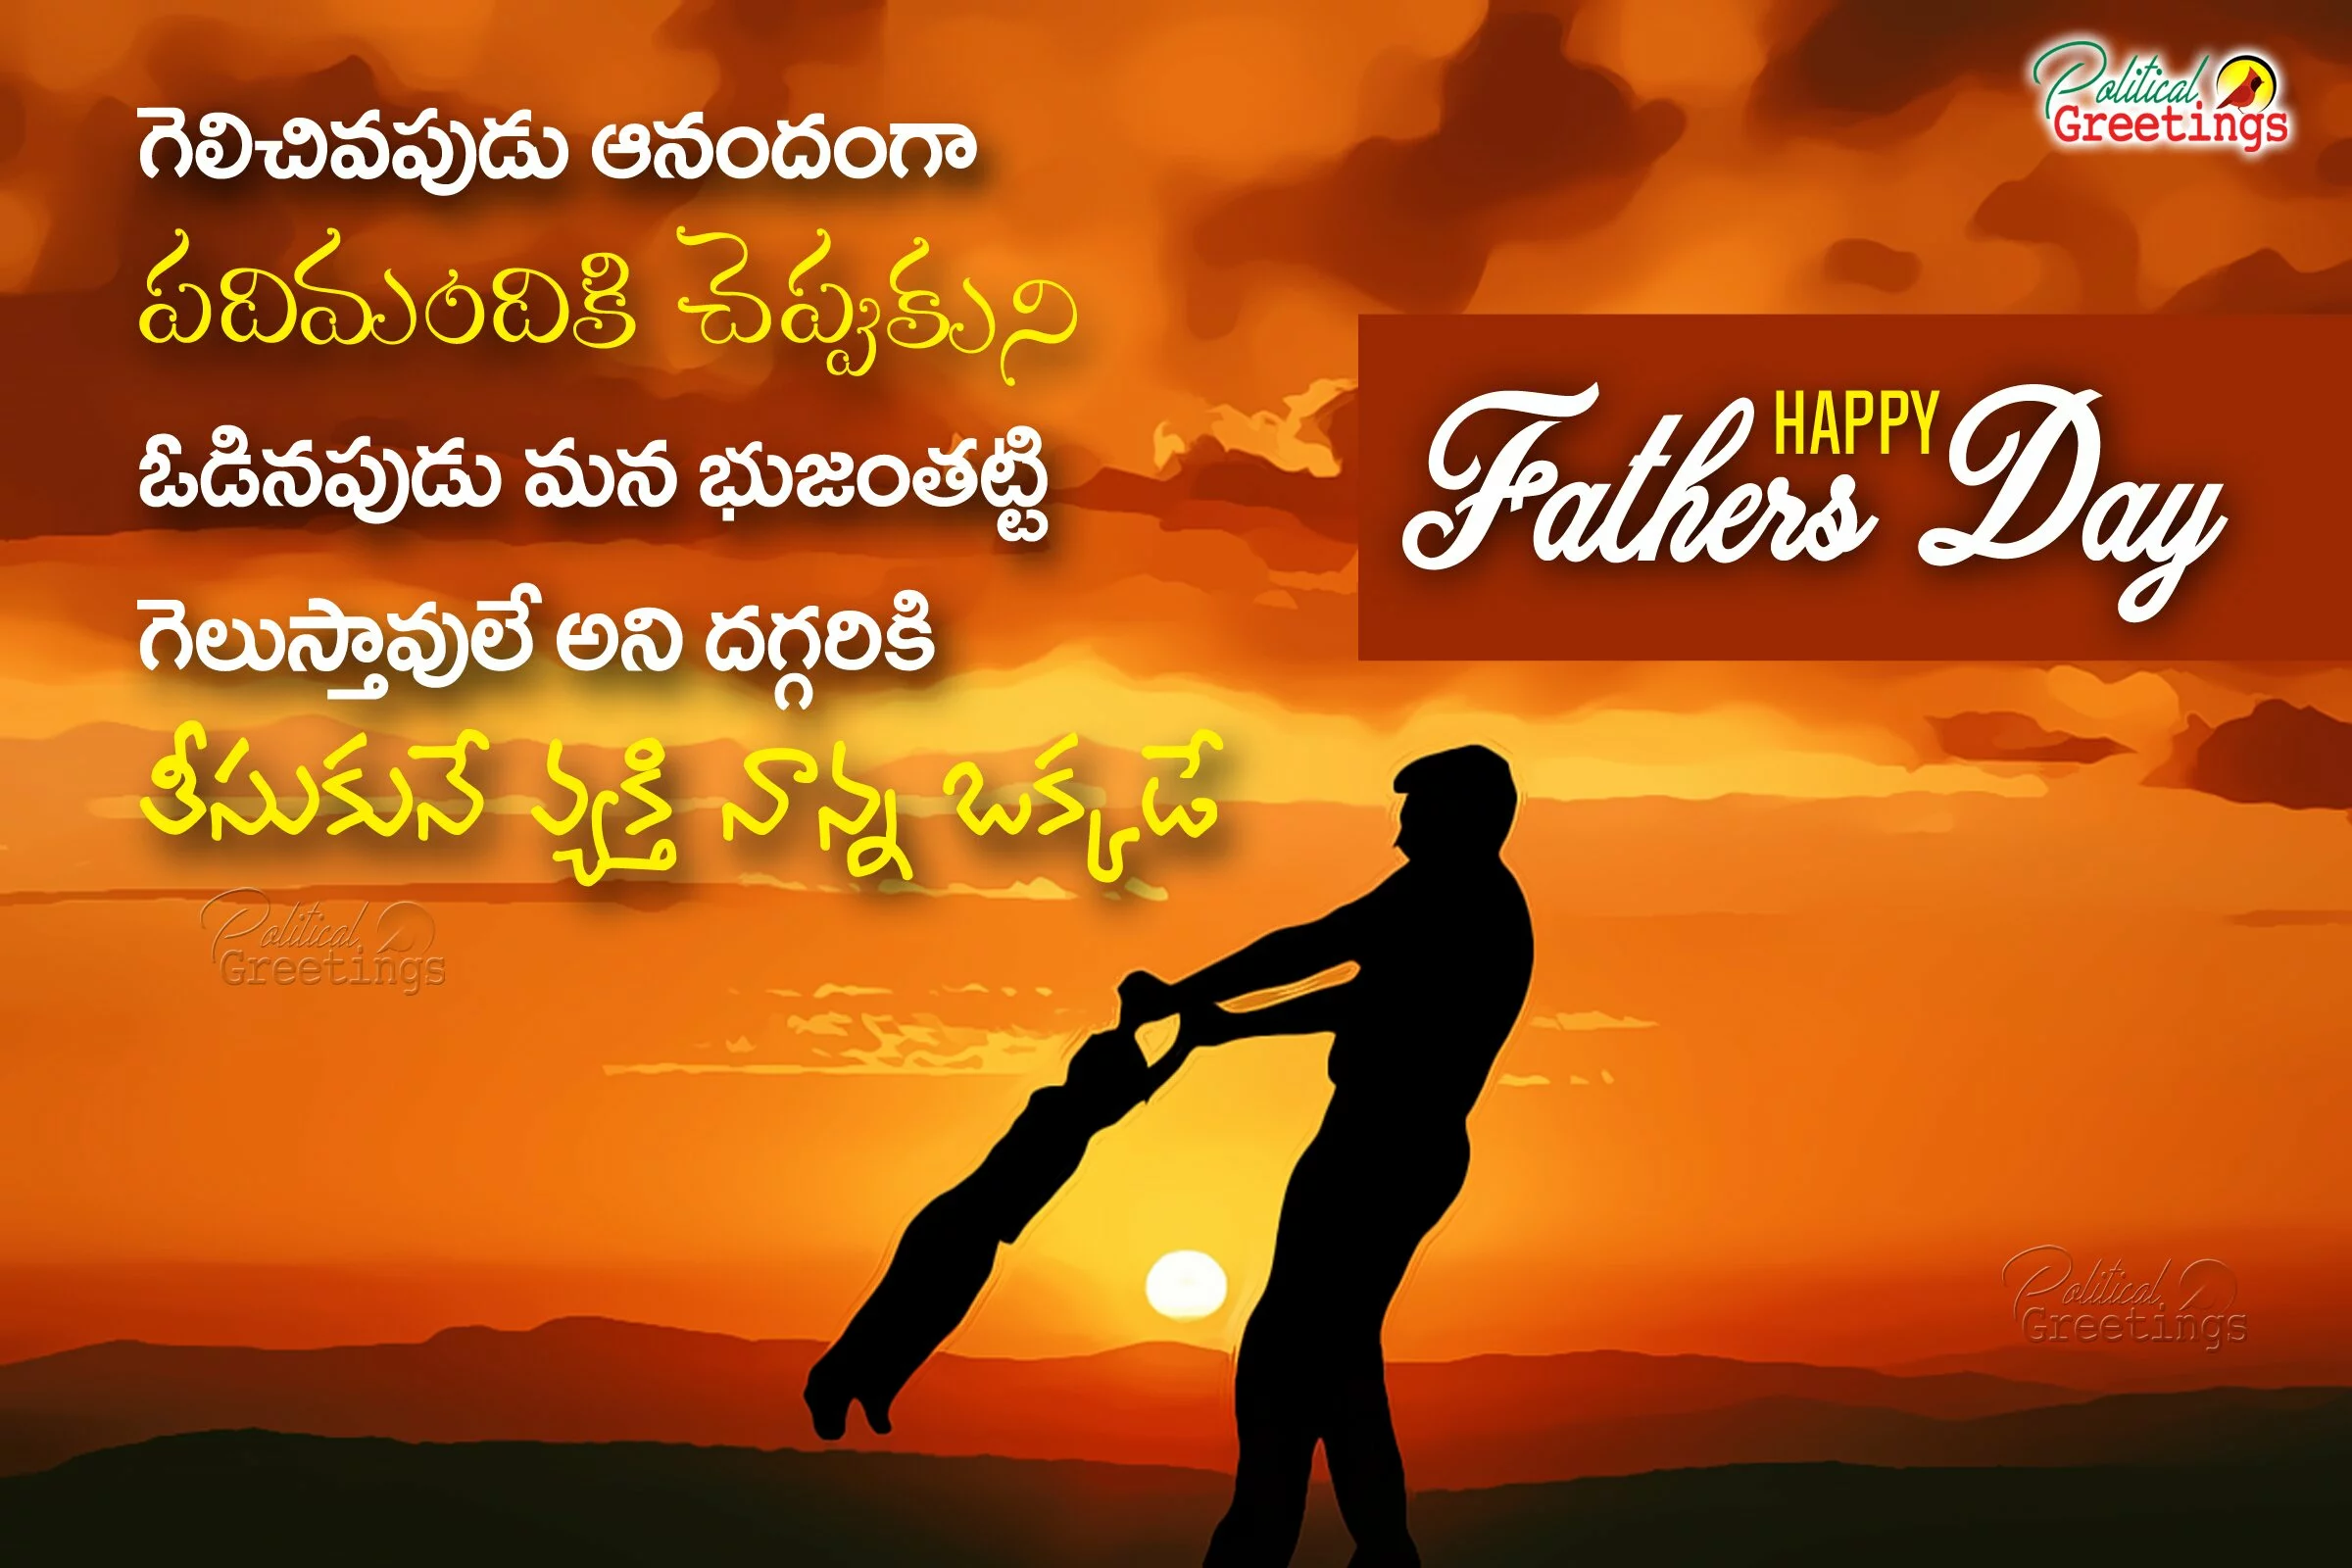 happy-fathers-day-telugu-wishes-quotes-greetings-sms-messages